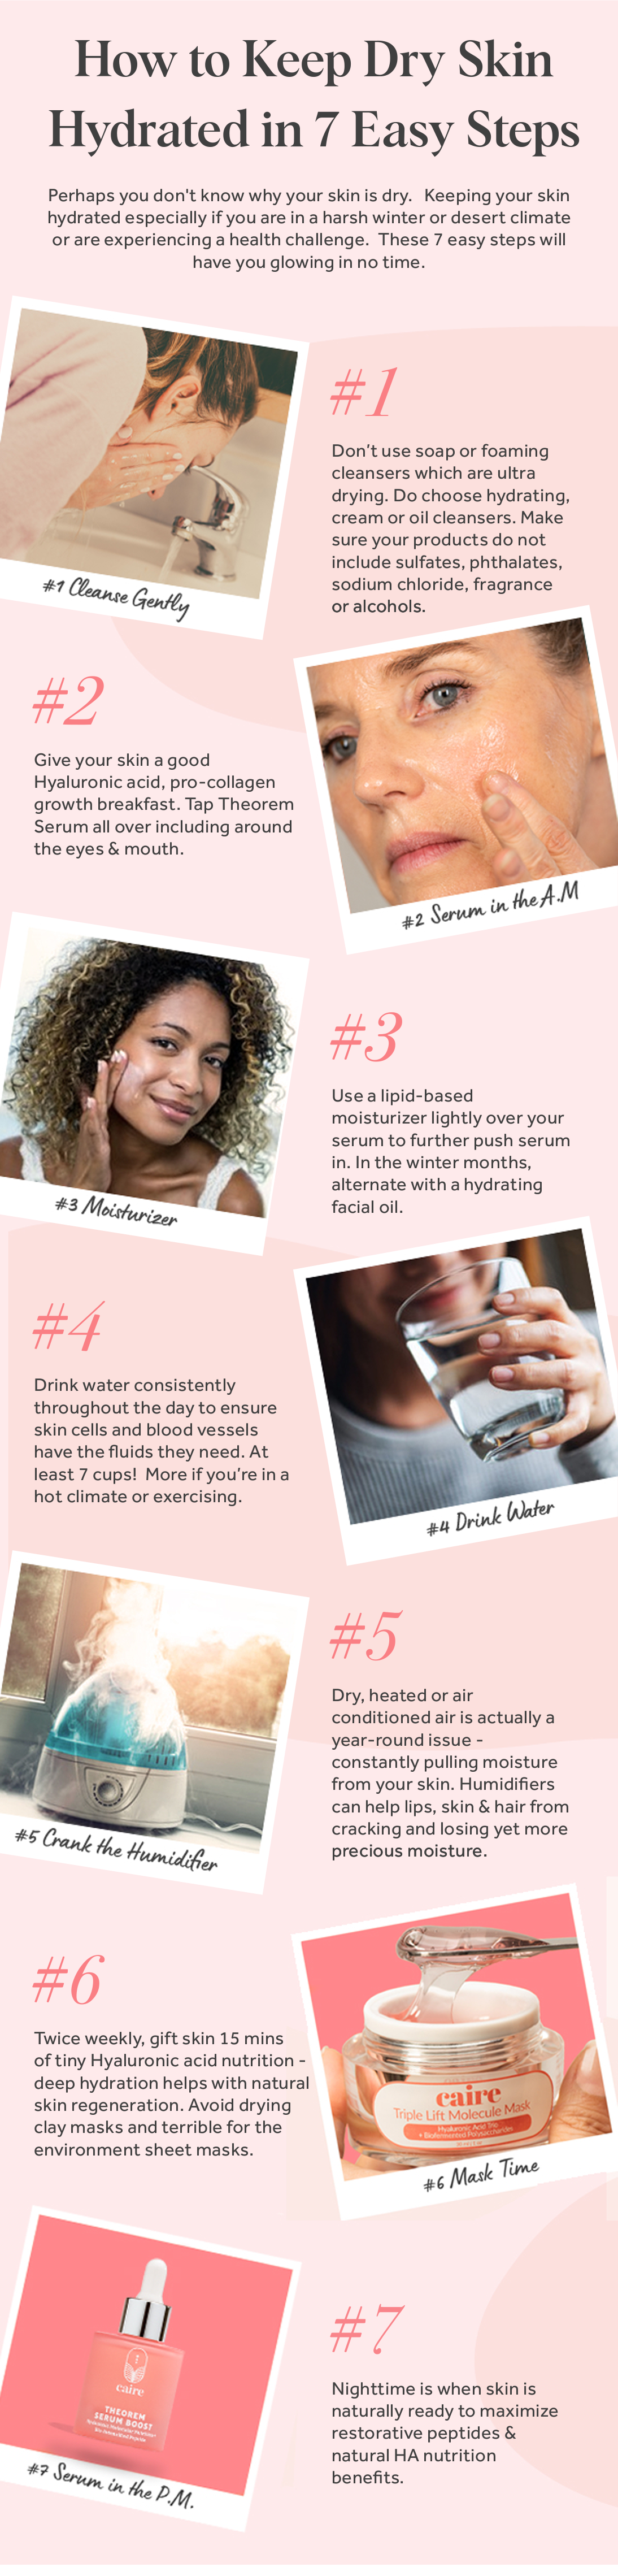 Guide for keeping your skin hydrated (email hello@cairebeauty.com for a text only copy for those who might want it)